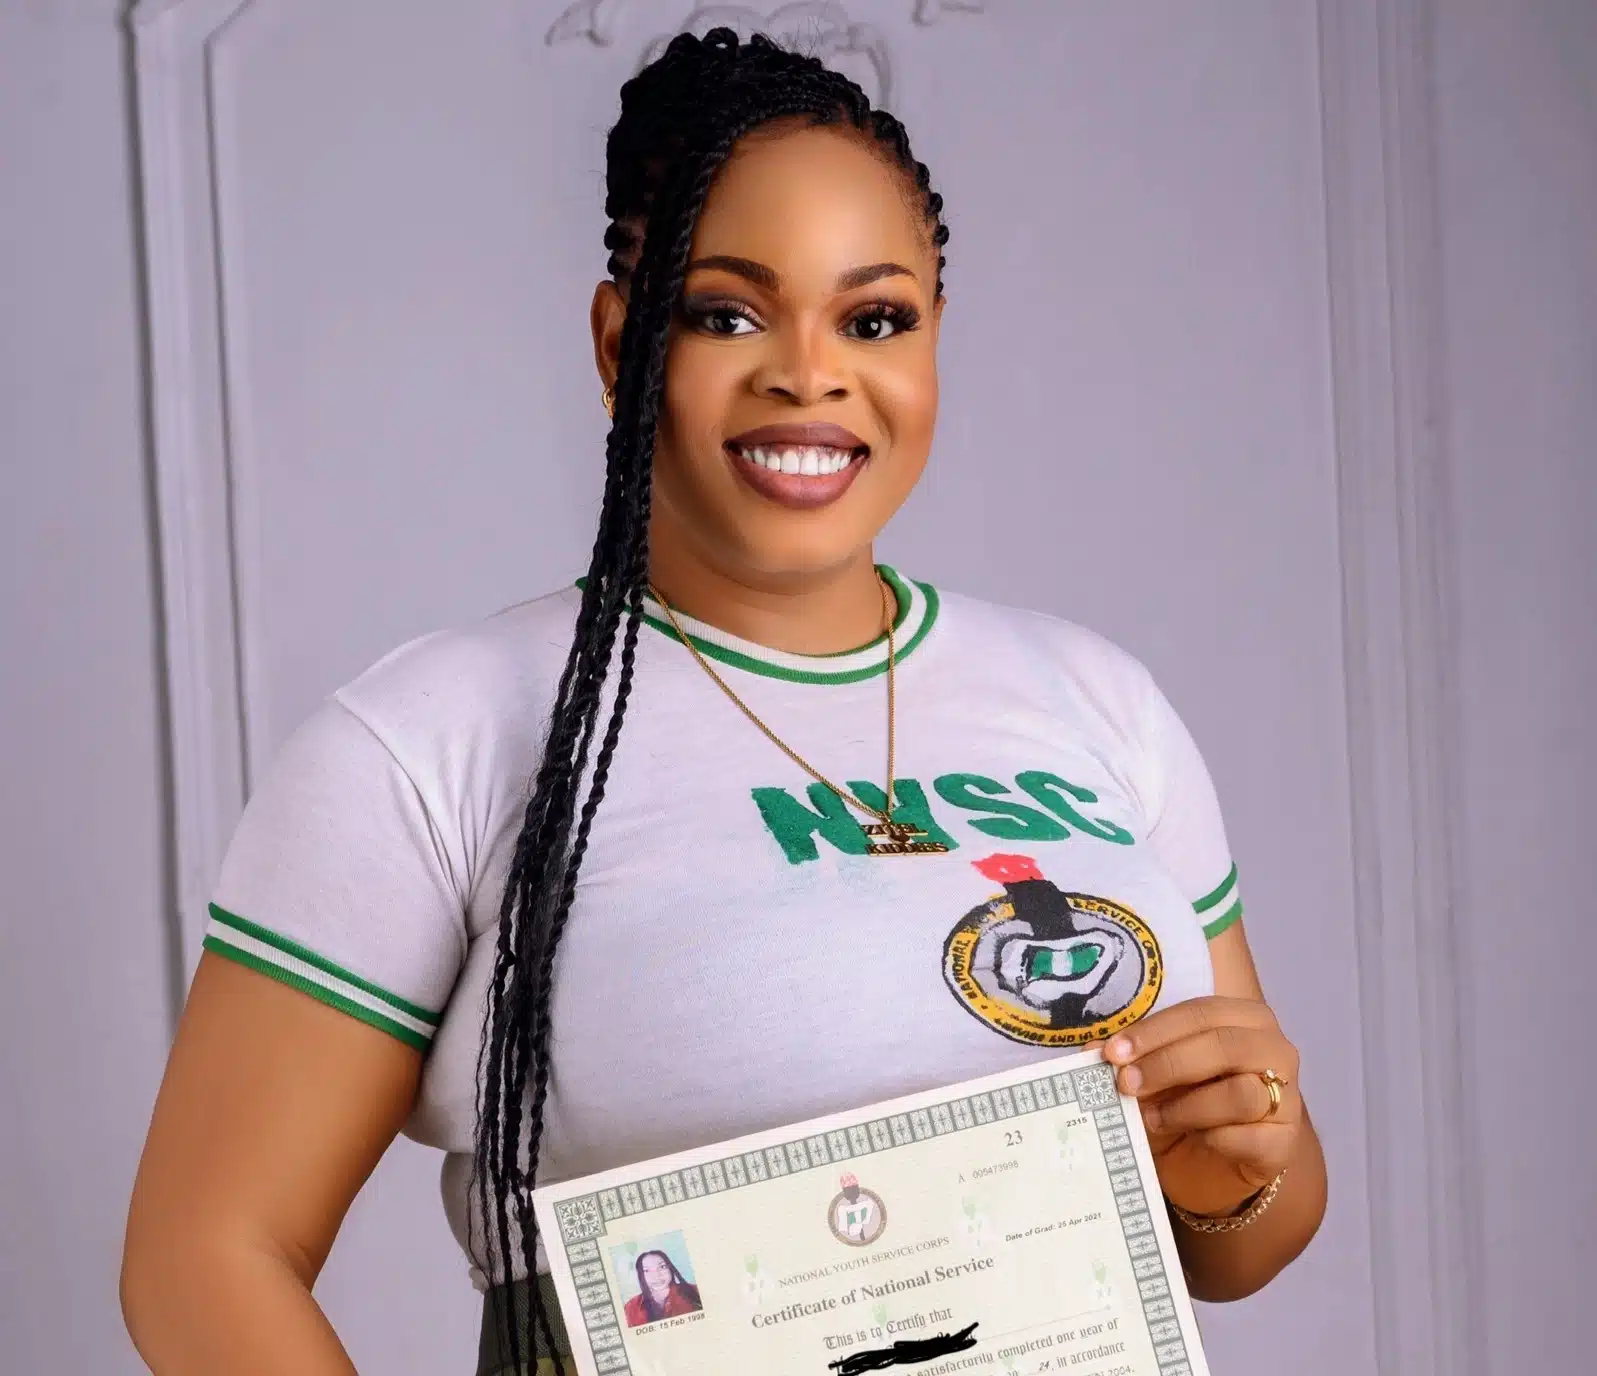 Nigerian woman celebrates NYSC completion with kids in matching uniforms